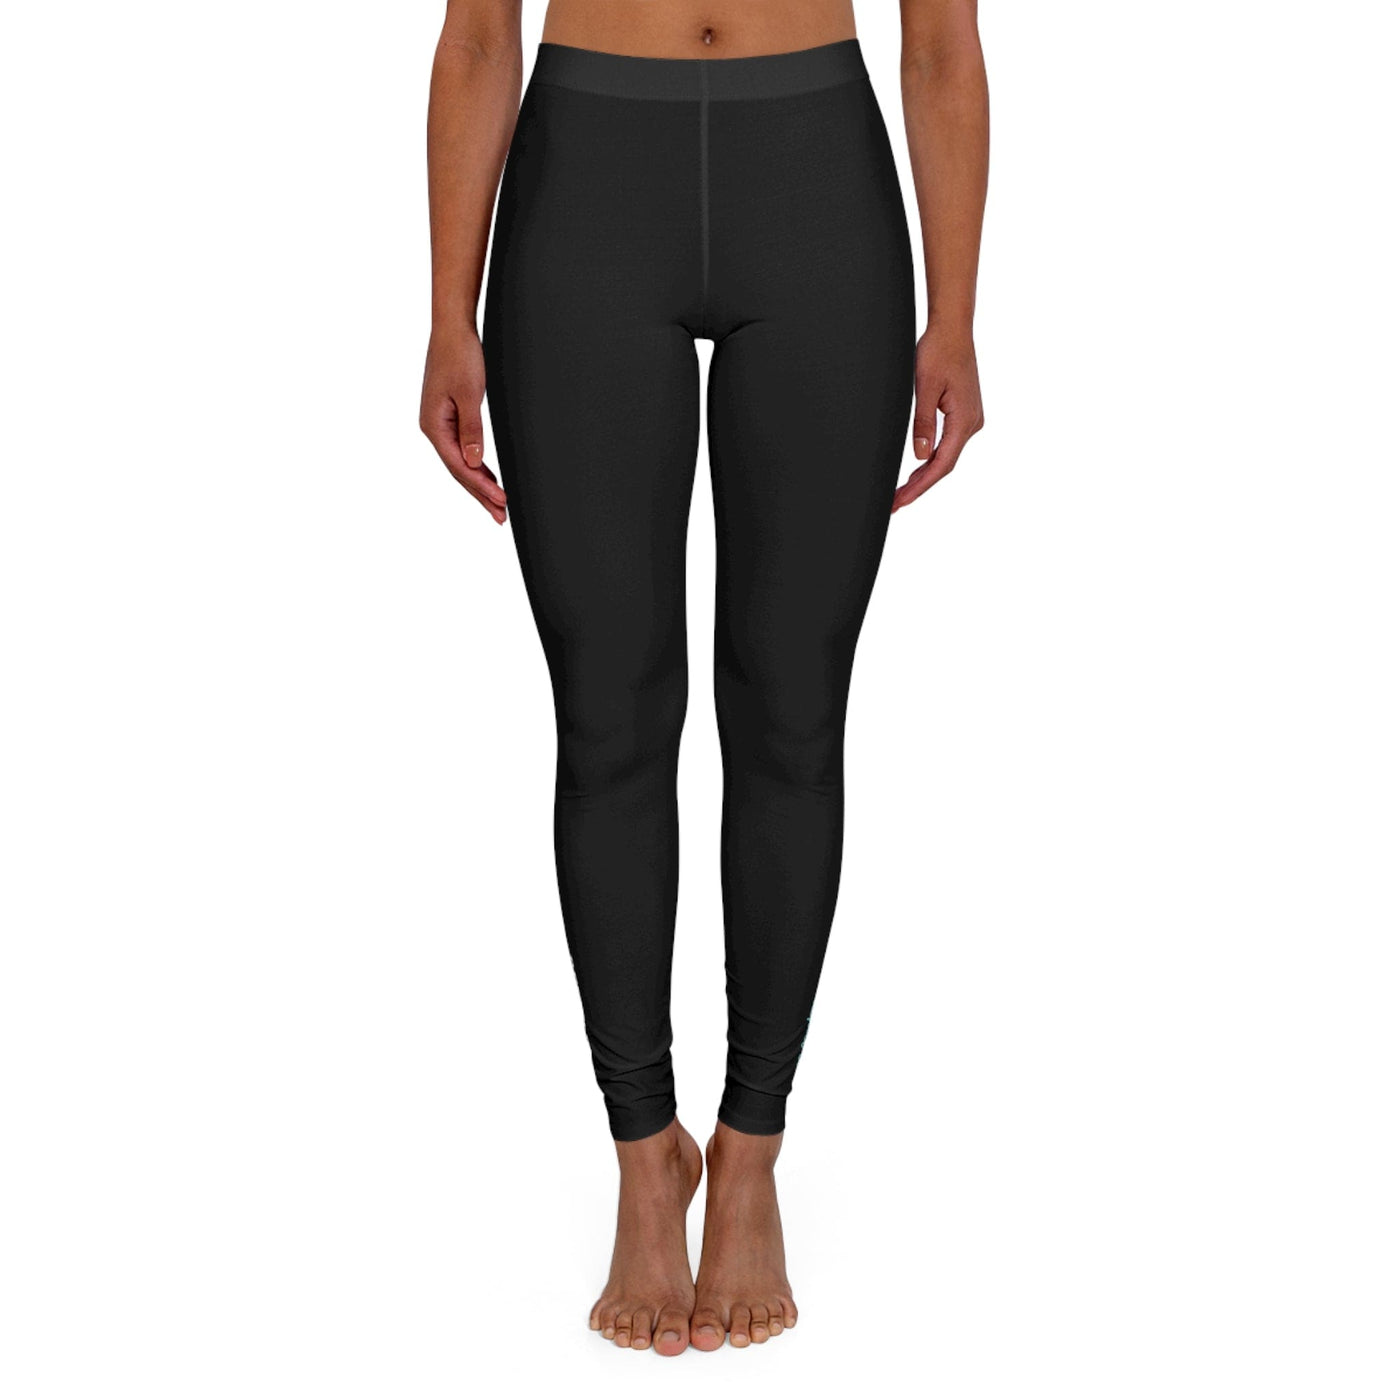 Womens Black Fitness Leggings Believe And Achieve - All Over Prints